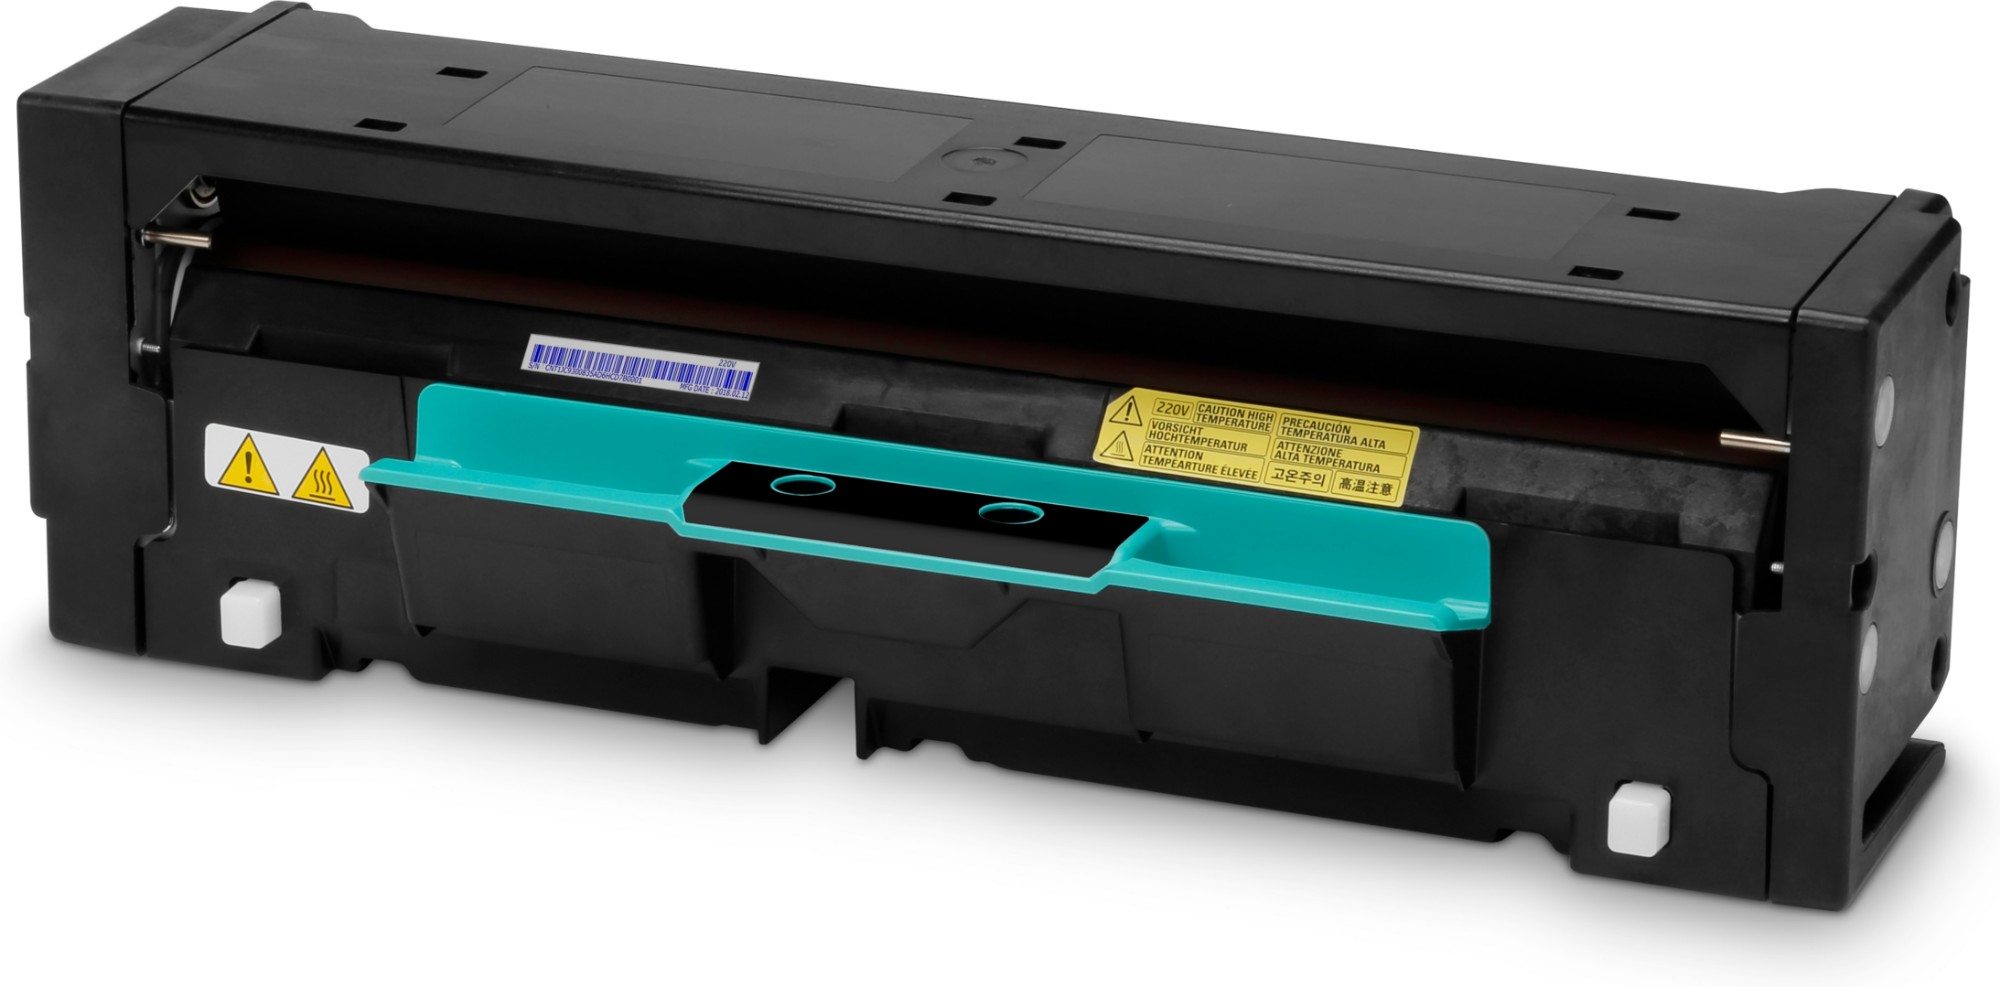 HP 3MZ76A Fuser kit, 450K pages for HP Pro MFP 772